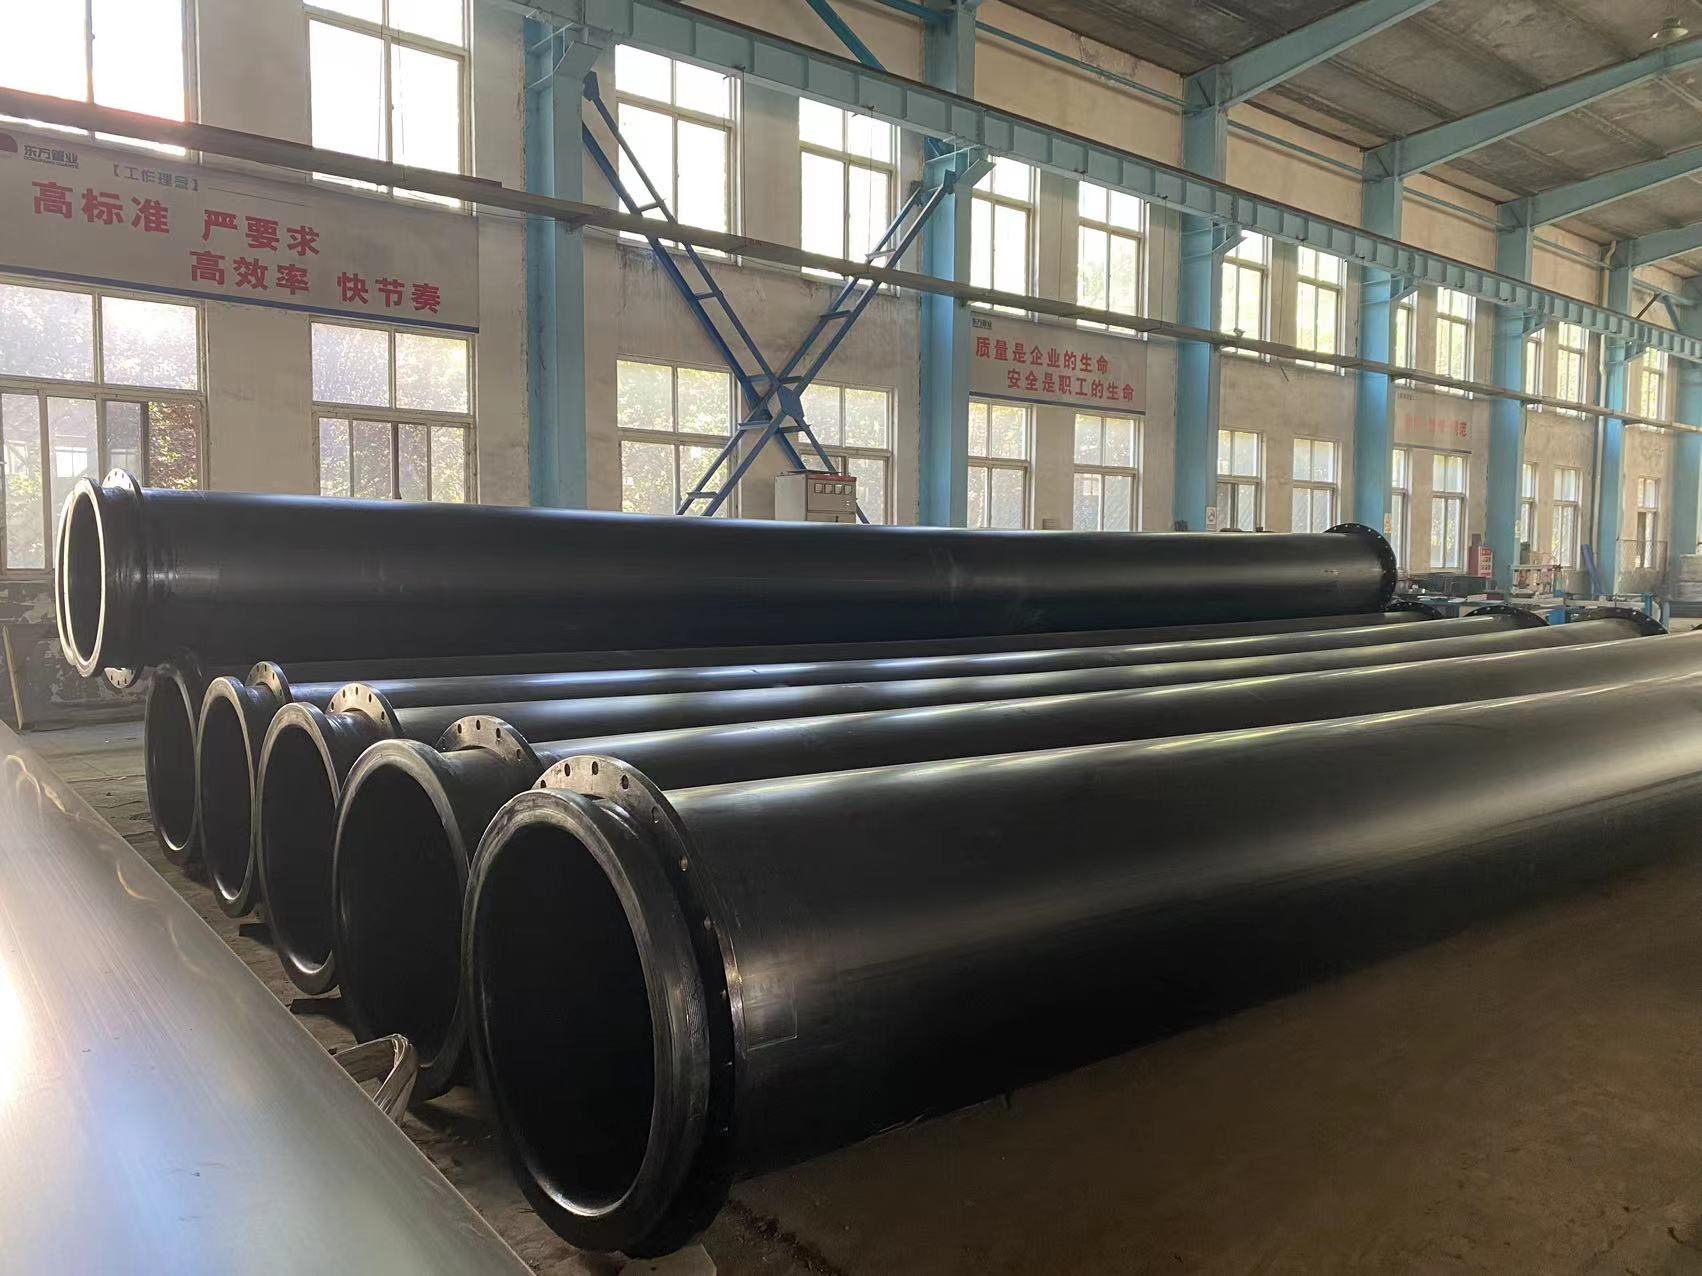 UHMWPE pipe awaiting delivery site